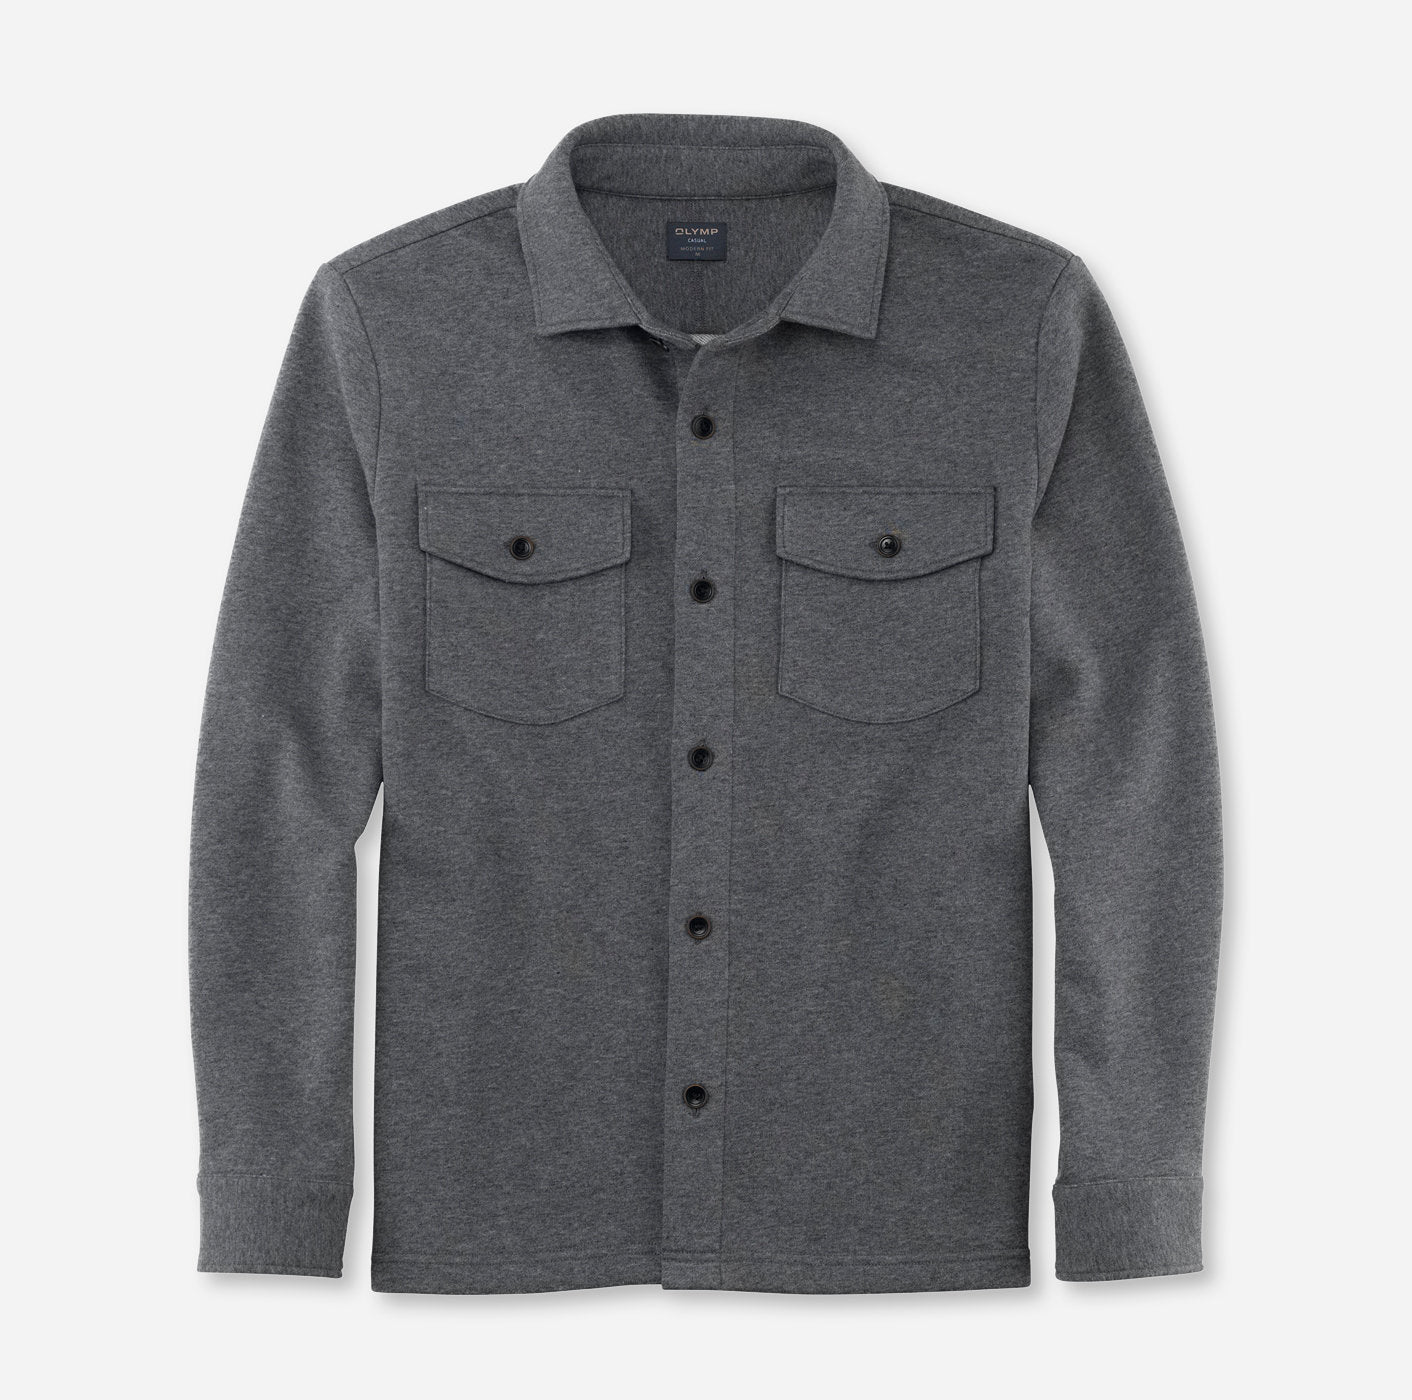 Overshirt - Anthracite - Modern fit - Casual